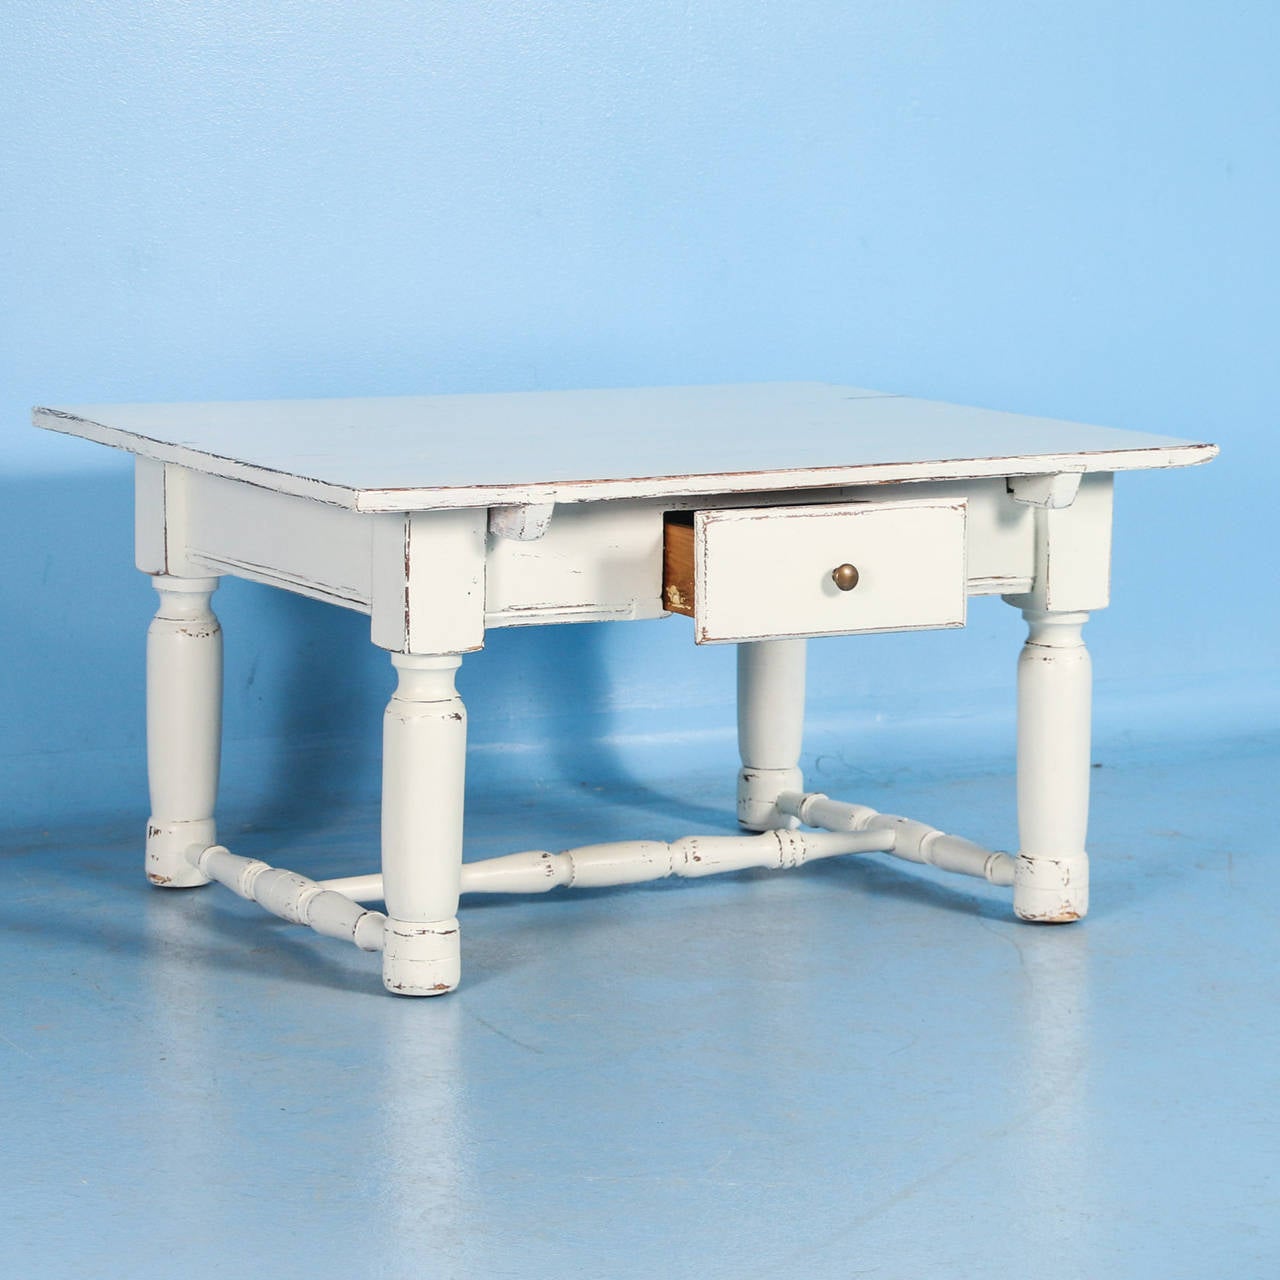 This delightful coffee table has recently been given a white painted finish, adding to the European country charm of the piece. The single drawer and turned stretcher base add to the visual appeal, creating great impact in a small space. The table